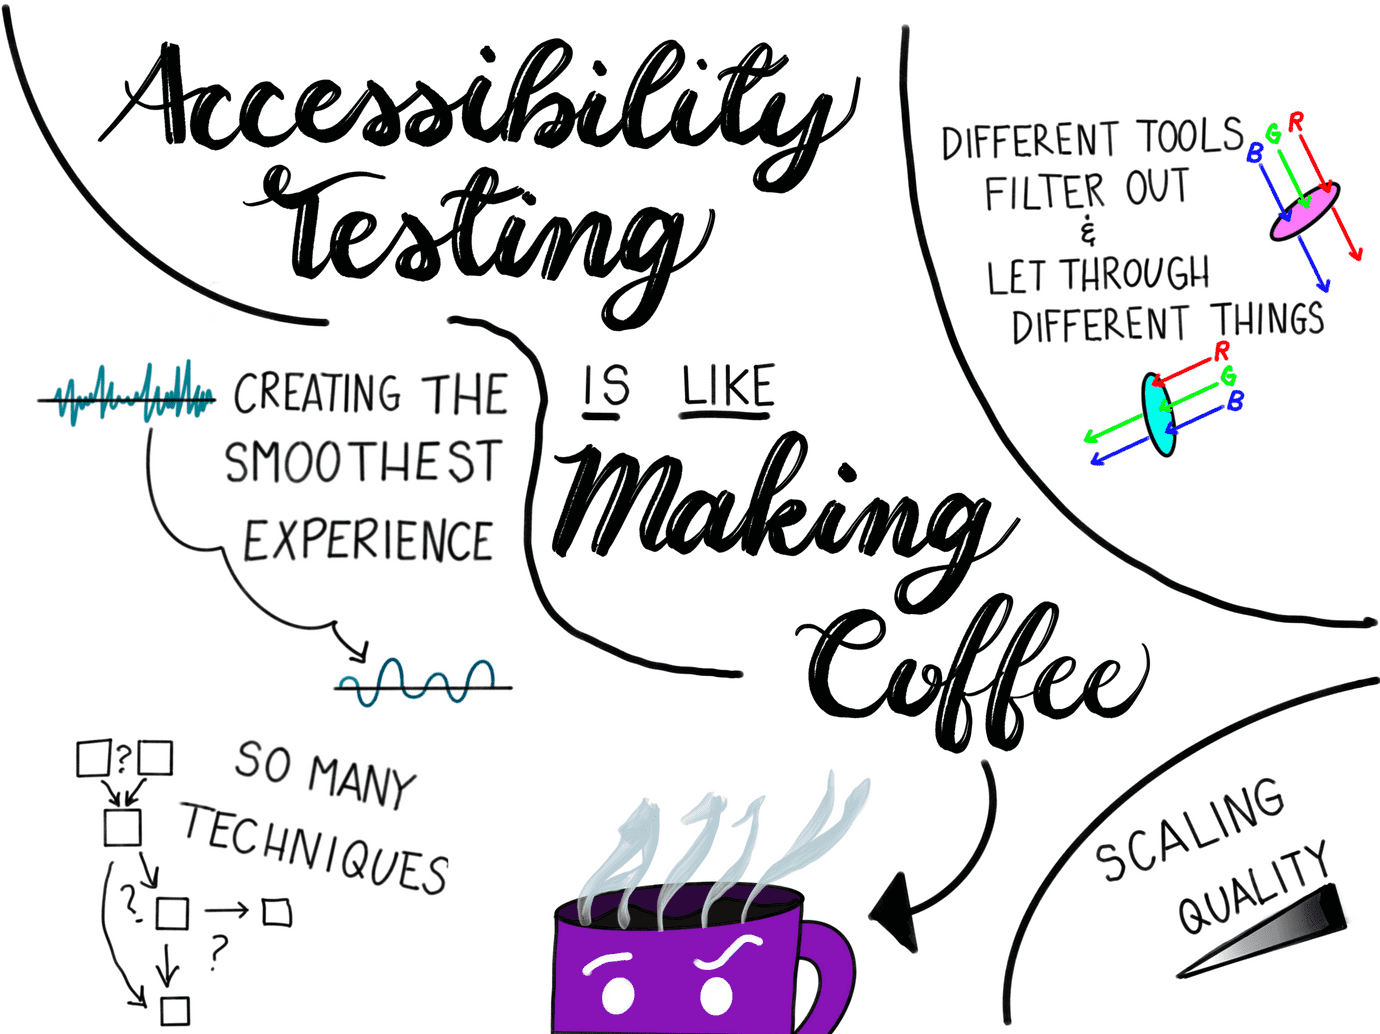 Accessibility is Like Making Coffee 